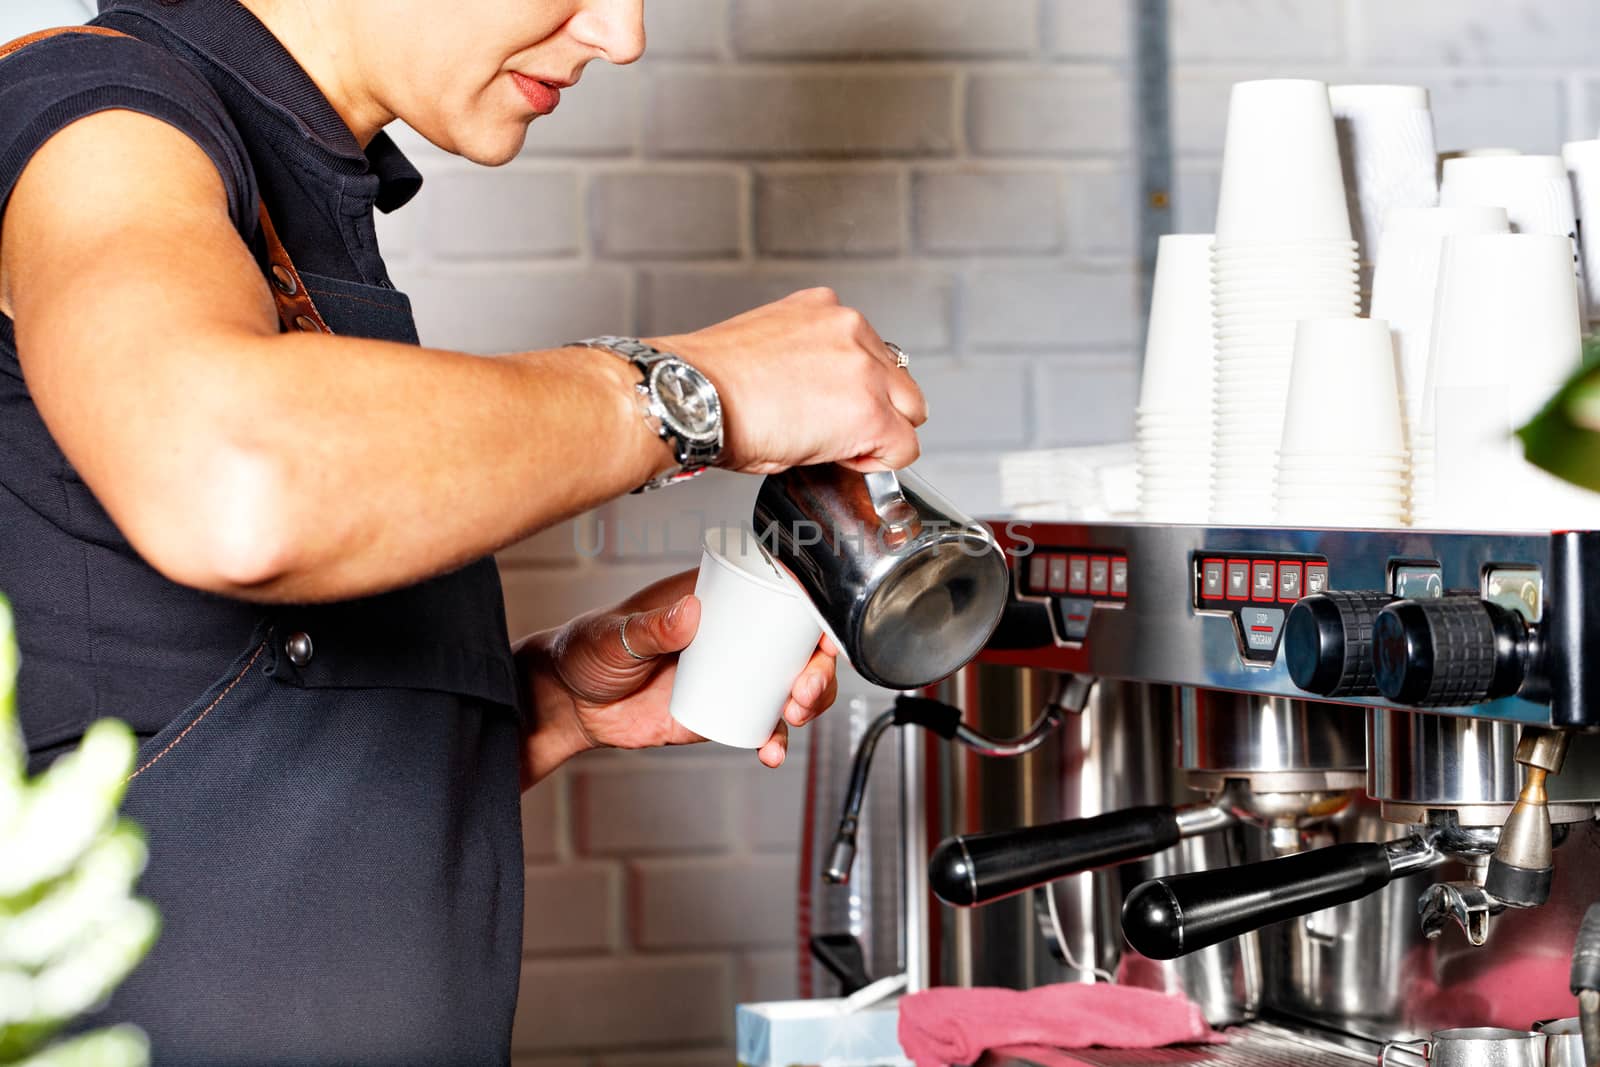 A barista in a black apron pours freshly prepared coffee from a metal mug into a paper cup against the background of a coffee machine and a stack of empty paper cups in blur.